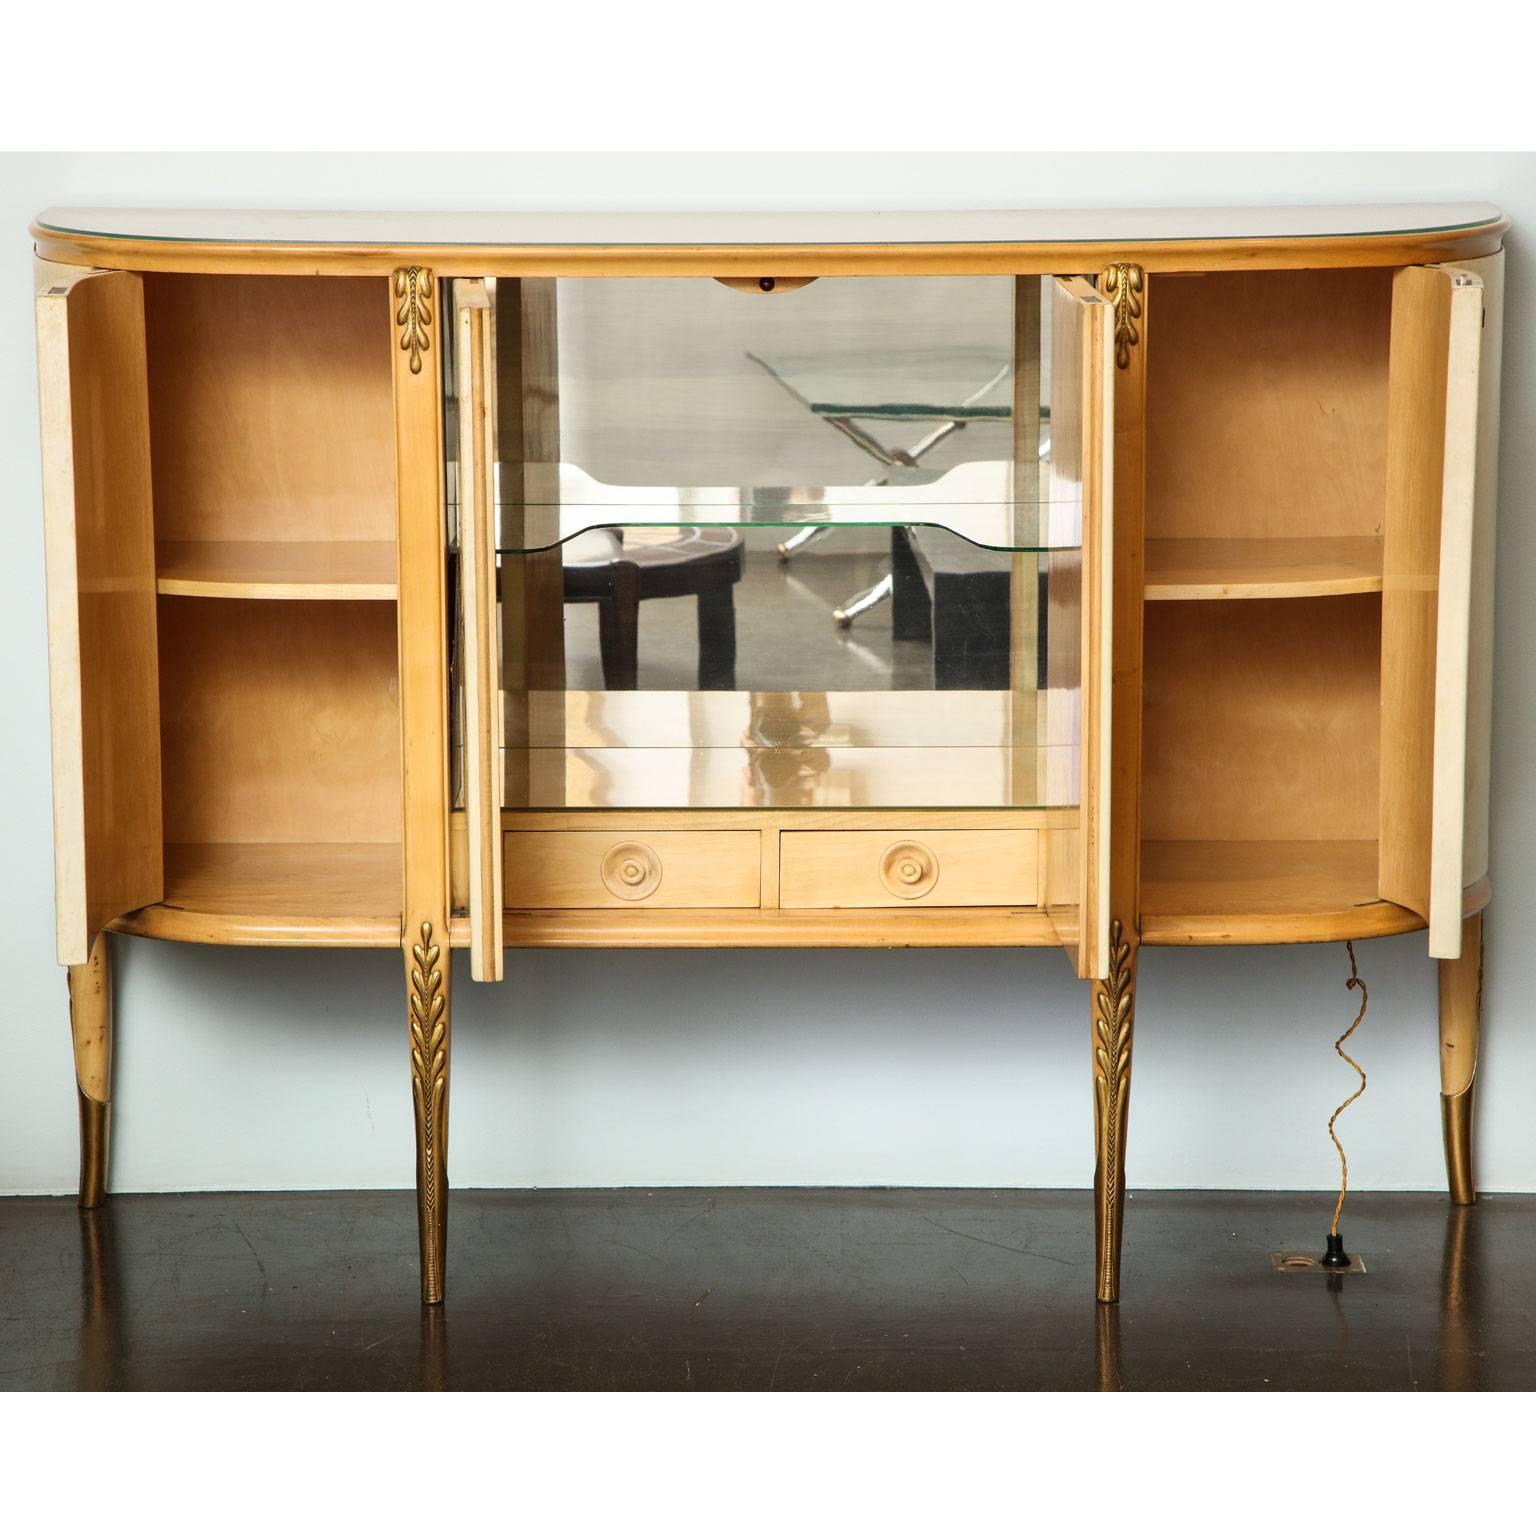 Giovanni Gariboldi (1908-1971)
Illuminated bar cabinet in sycamore, pearwood and carved
giltwood, with fruitwood inlaid parchment doors. The central compartment opening to reveal one glass shelf and two sycamore drawers the sides open to reveal one